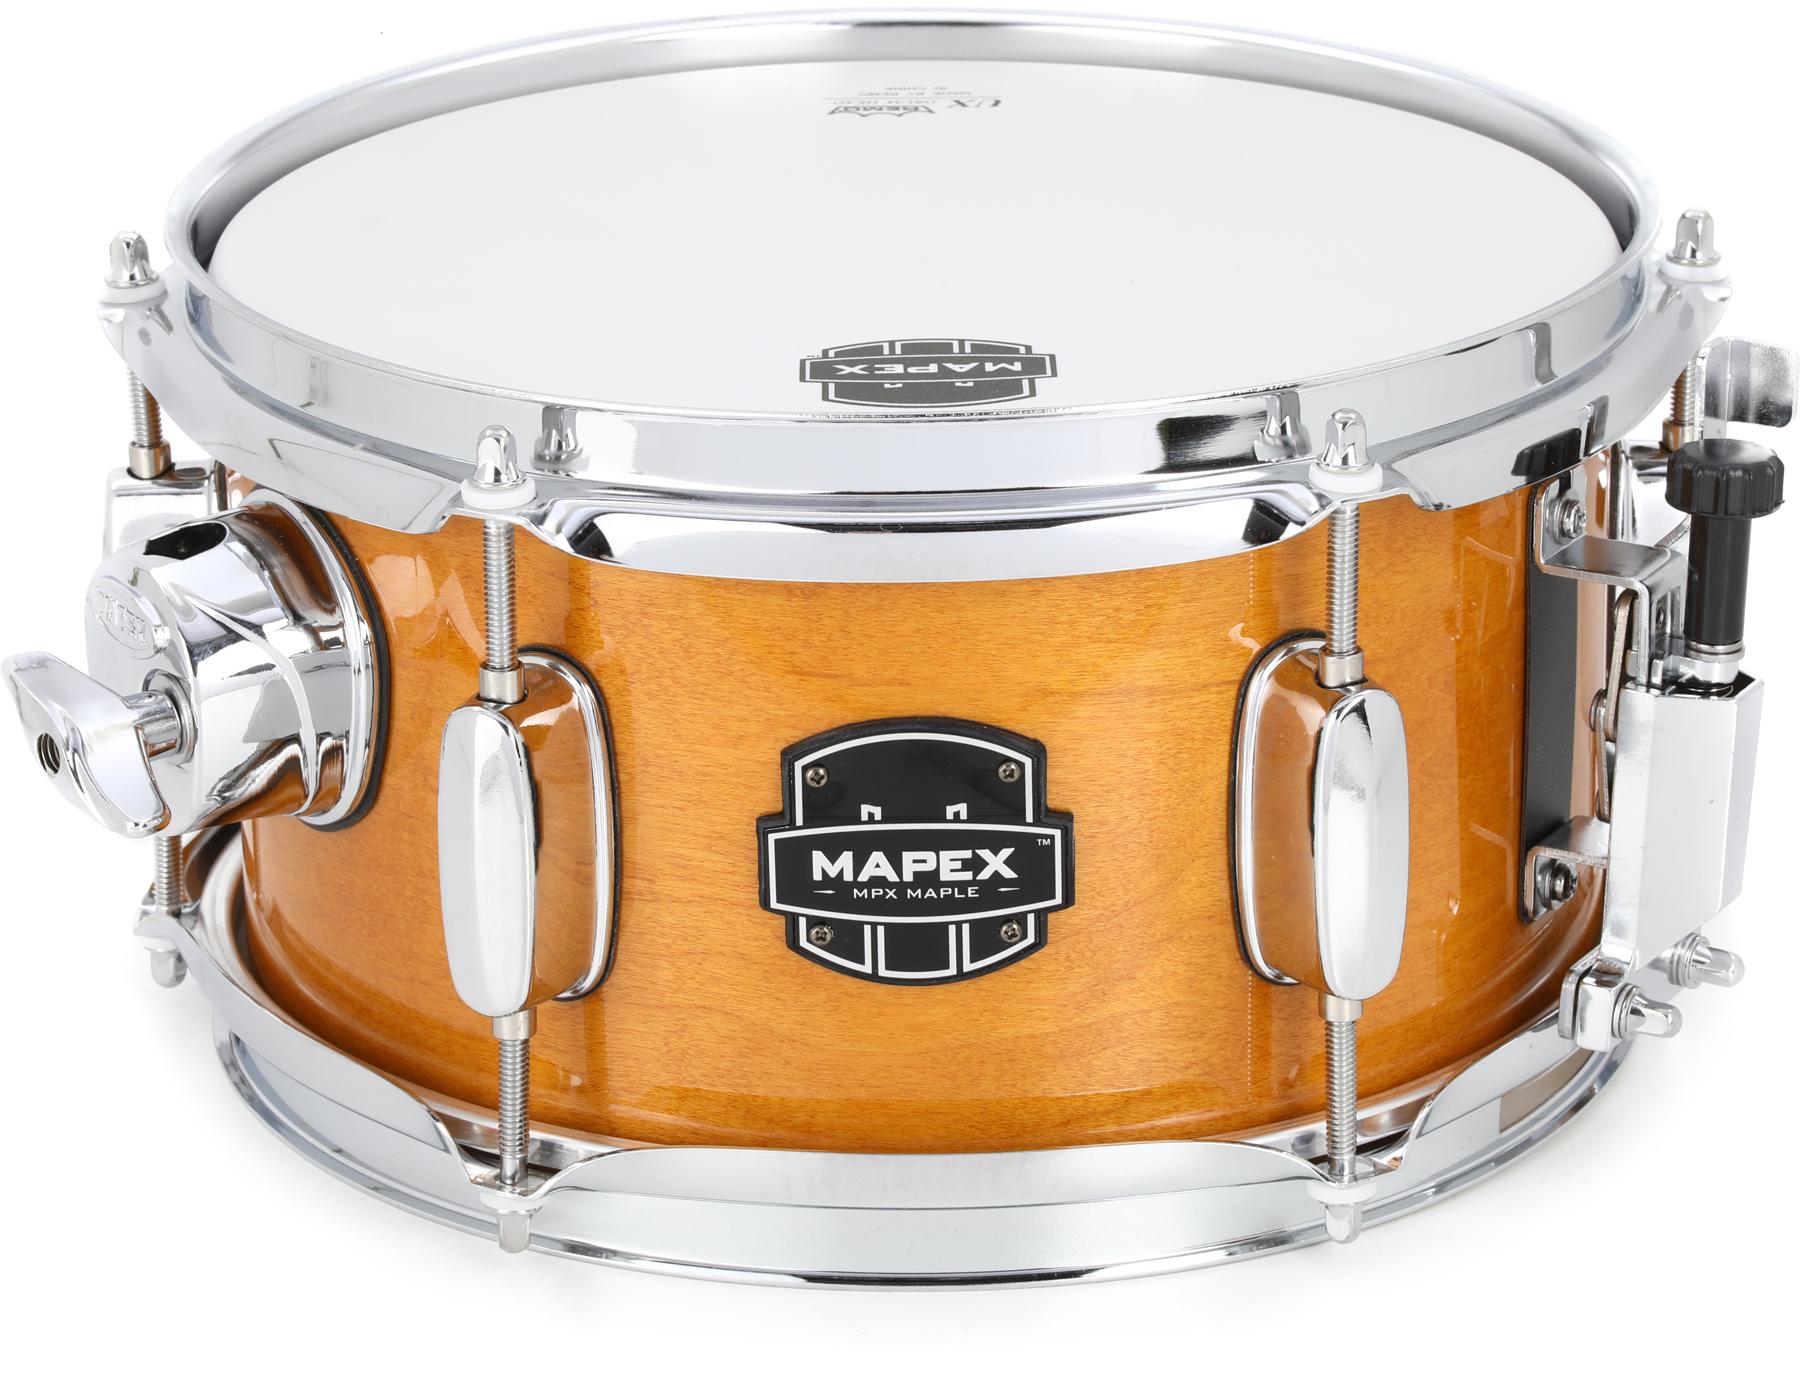 Mapex MPX Series Maple Side Snare Drum - 5.5 inch x 10 inch, Gloss Natural